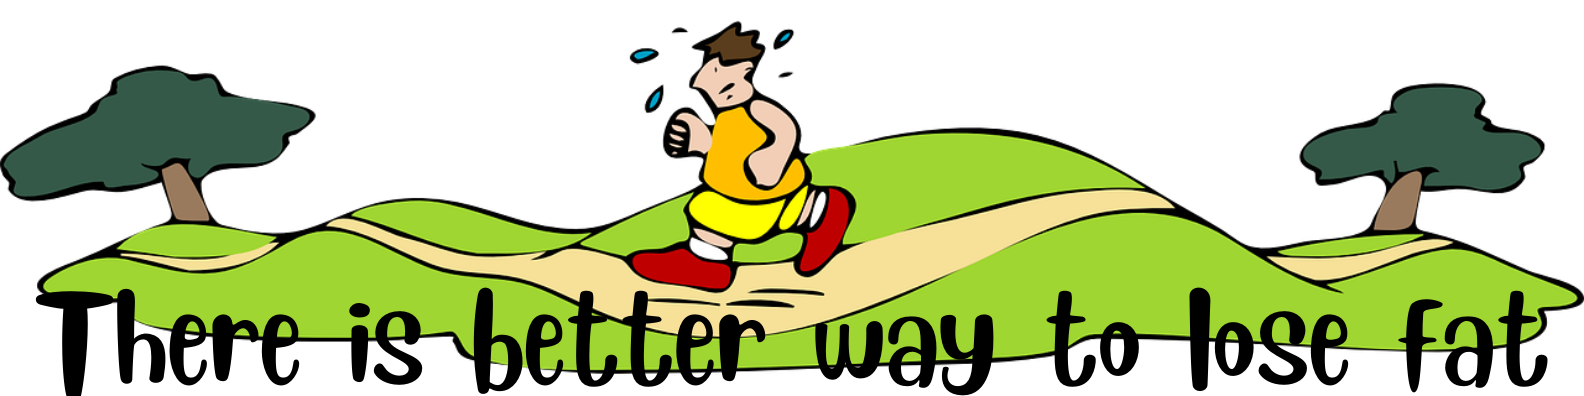 cartoon fat guy running and sweating his butt off the caption says there is a better way to lose fat